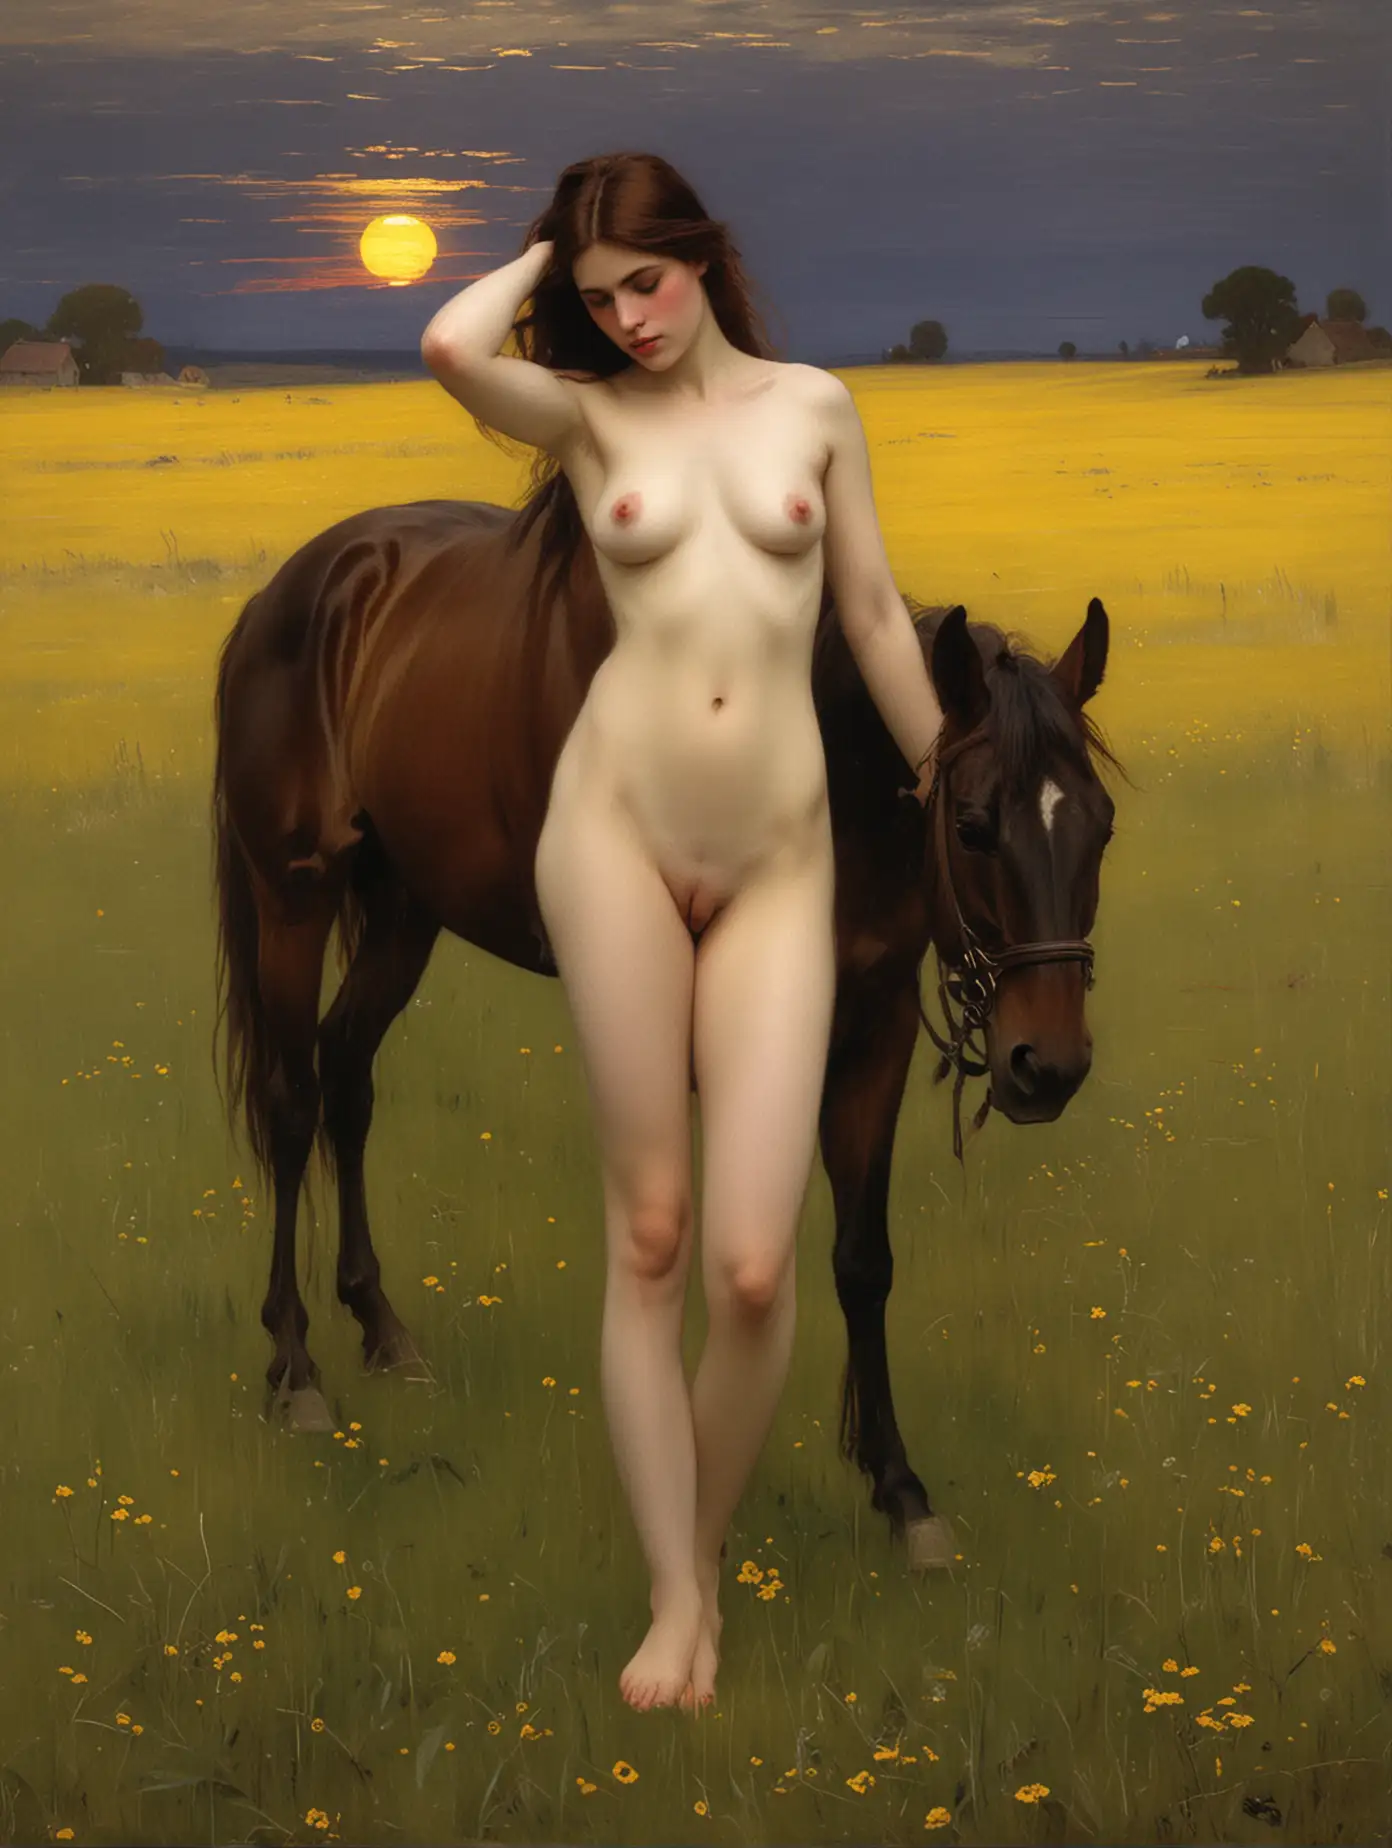 Twilight Nude Muse and Horse in Yellow Pasture Serene Equestrian Art